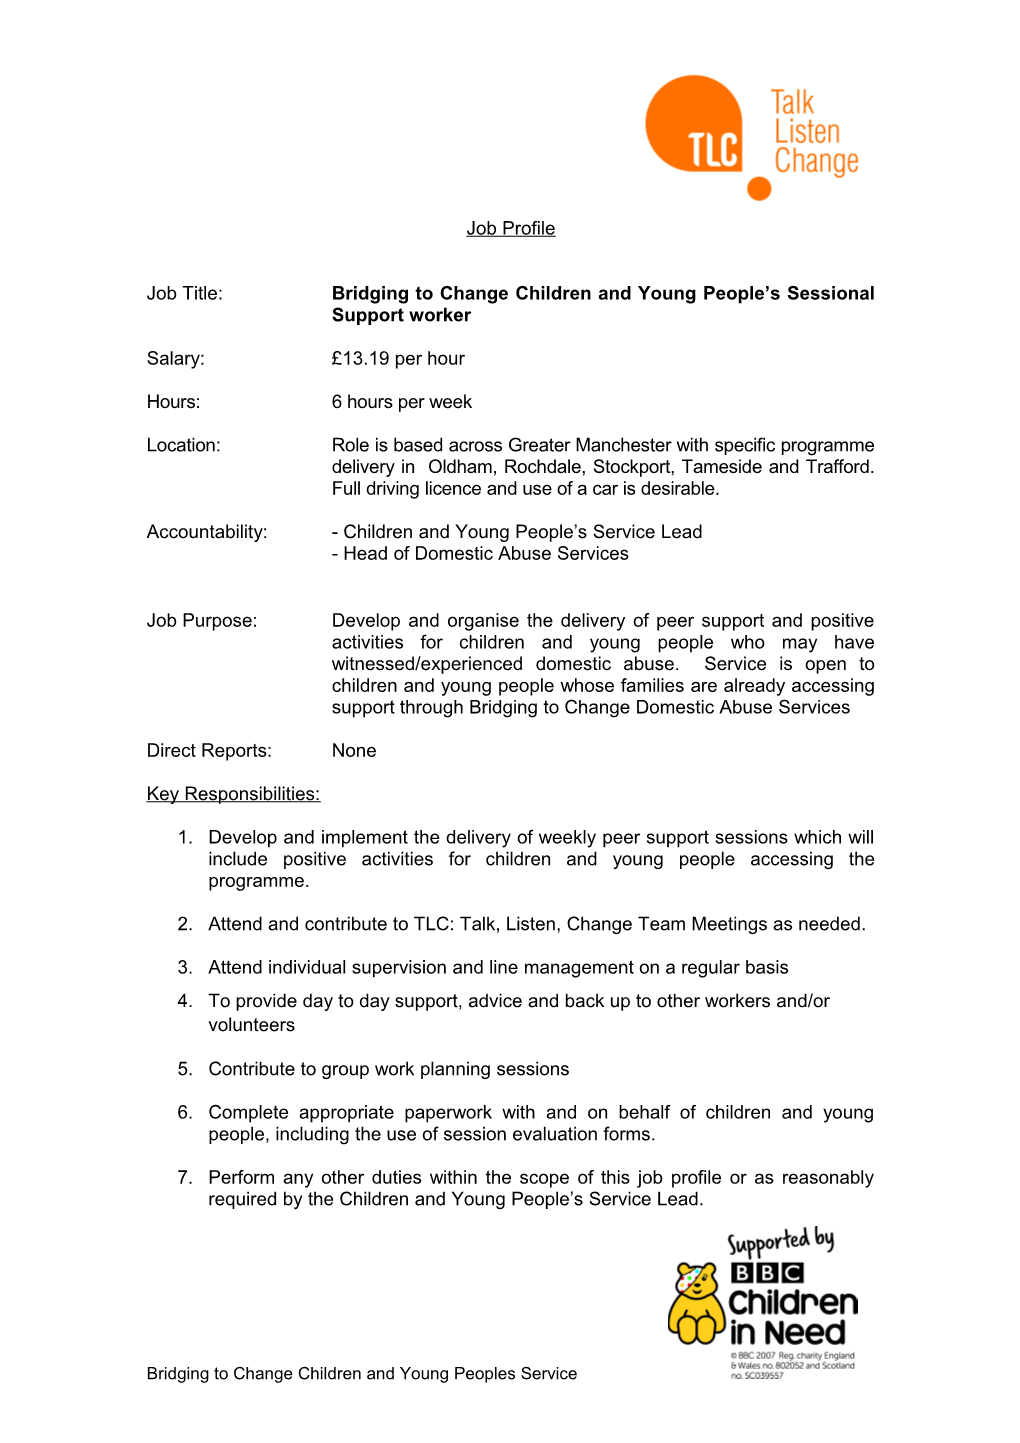 Job Title: Bridging to Change Children and Young People S Sessional Support Worker